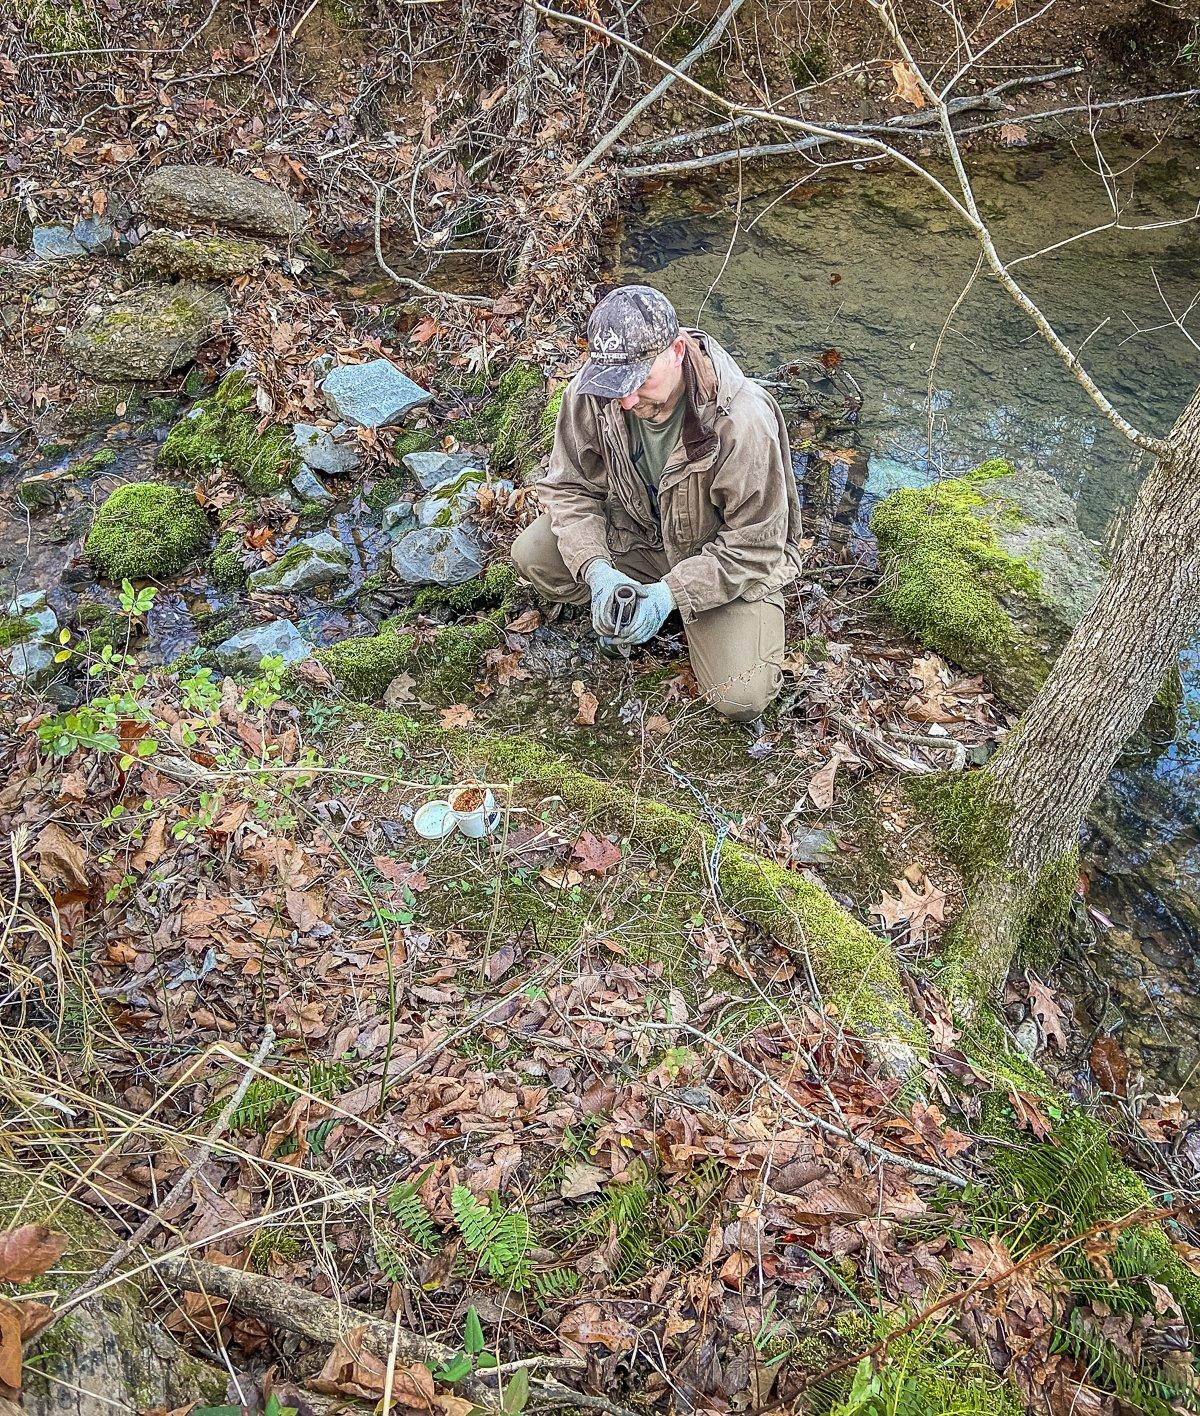 Creek banks are always good places to set raccoon traps. Image by Will Brantley